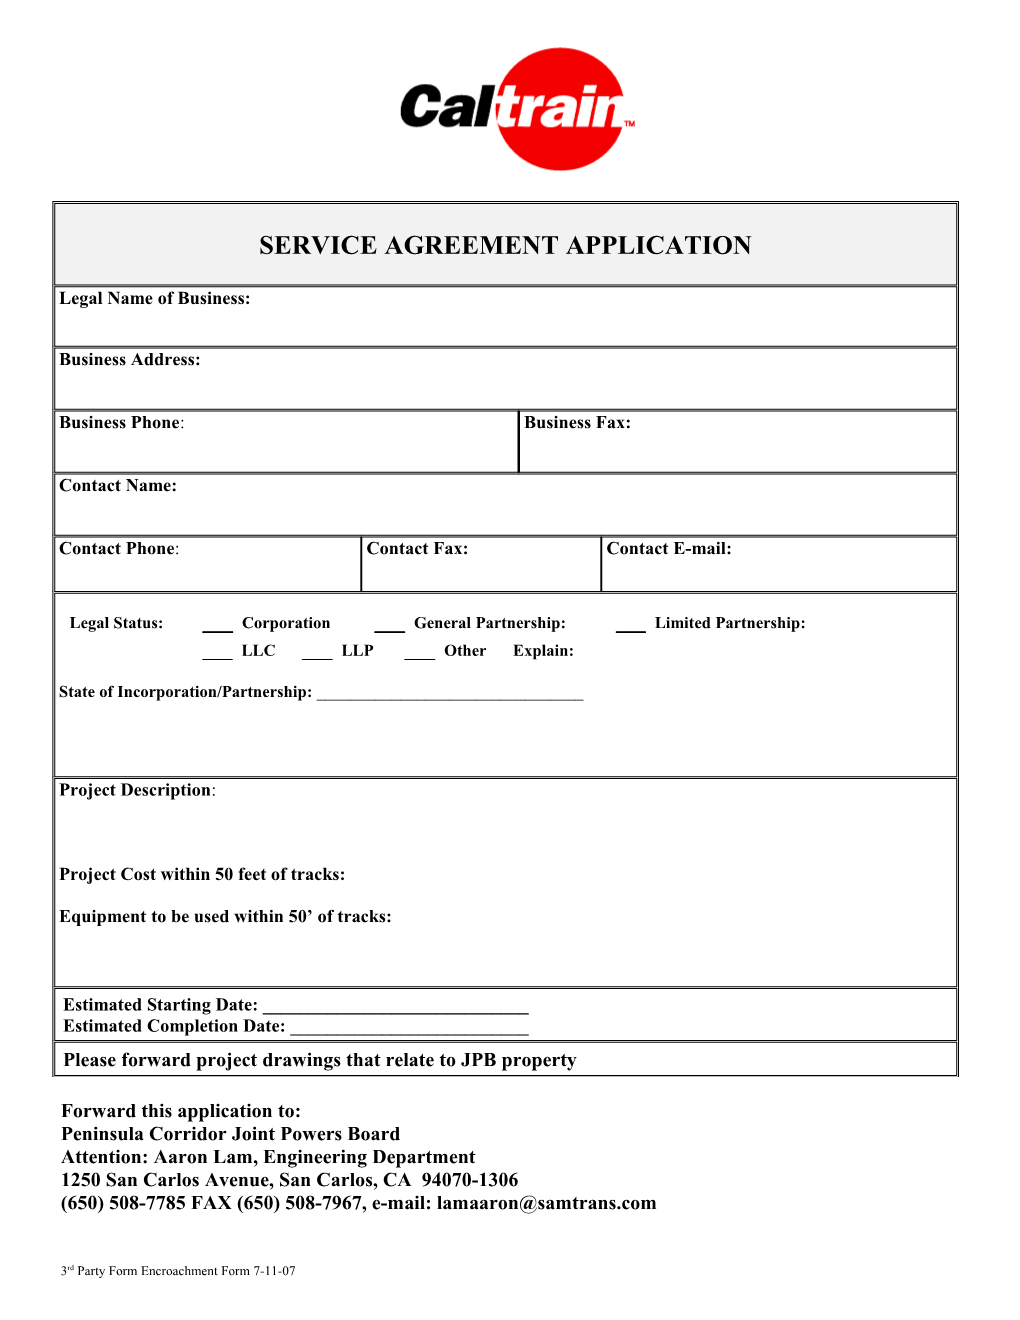 Service Agreement Application